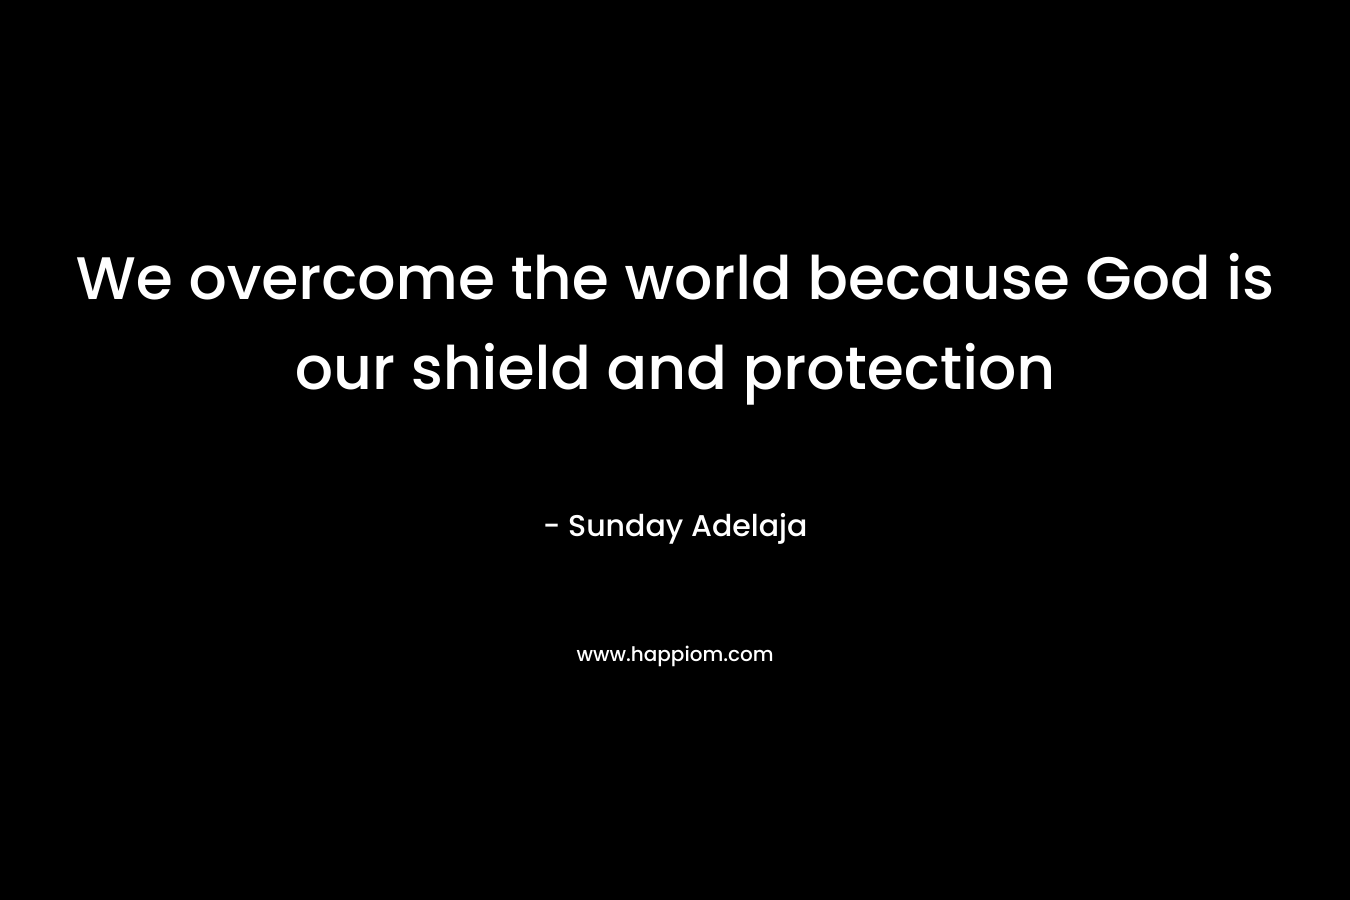 We overcome the world because God is our shield and protection